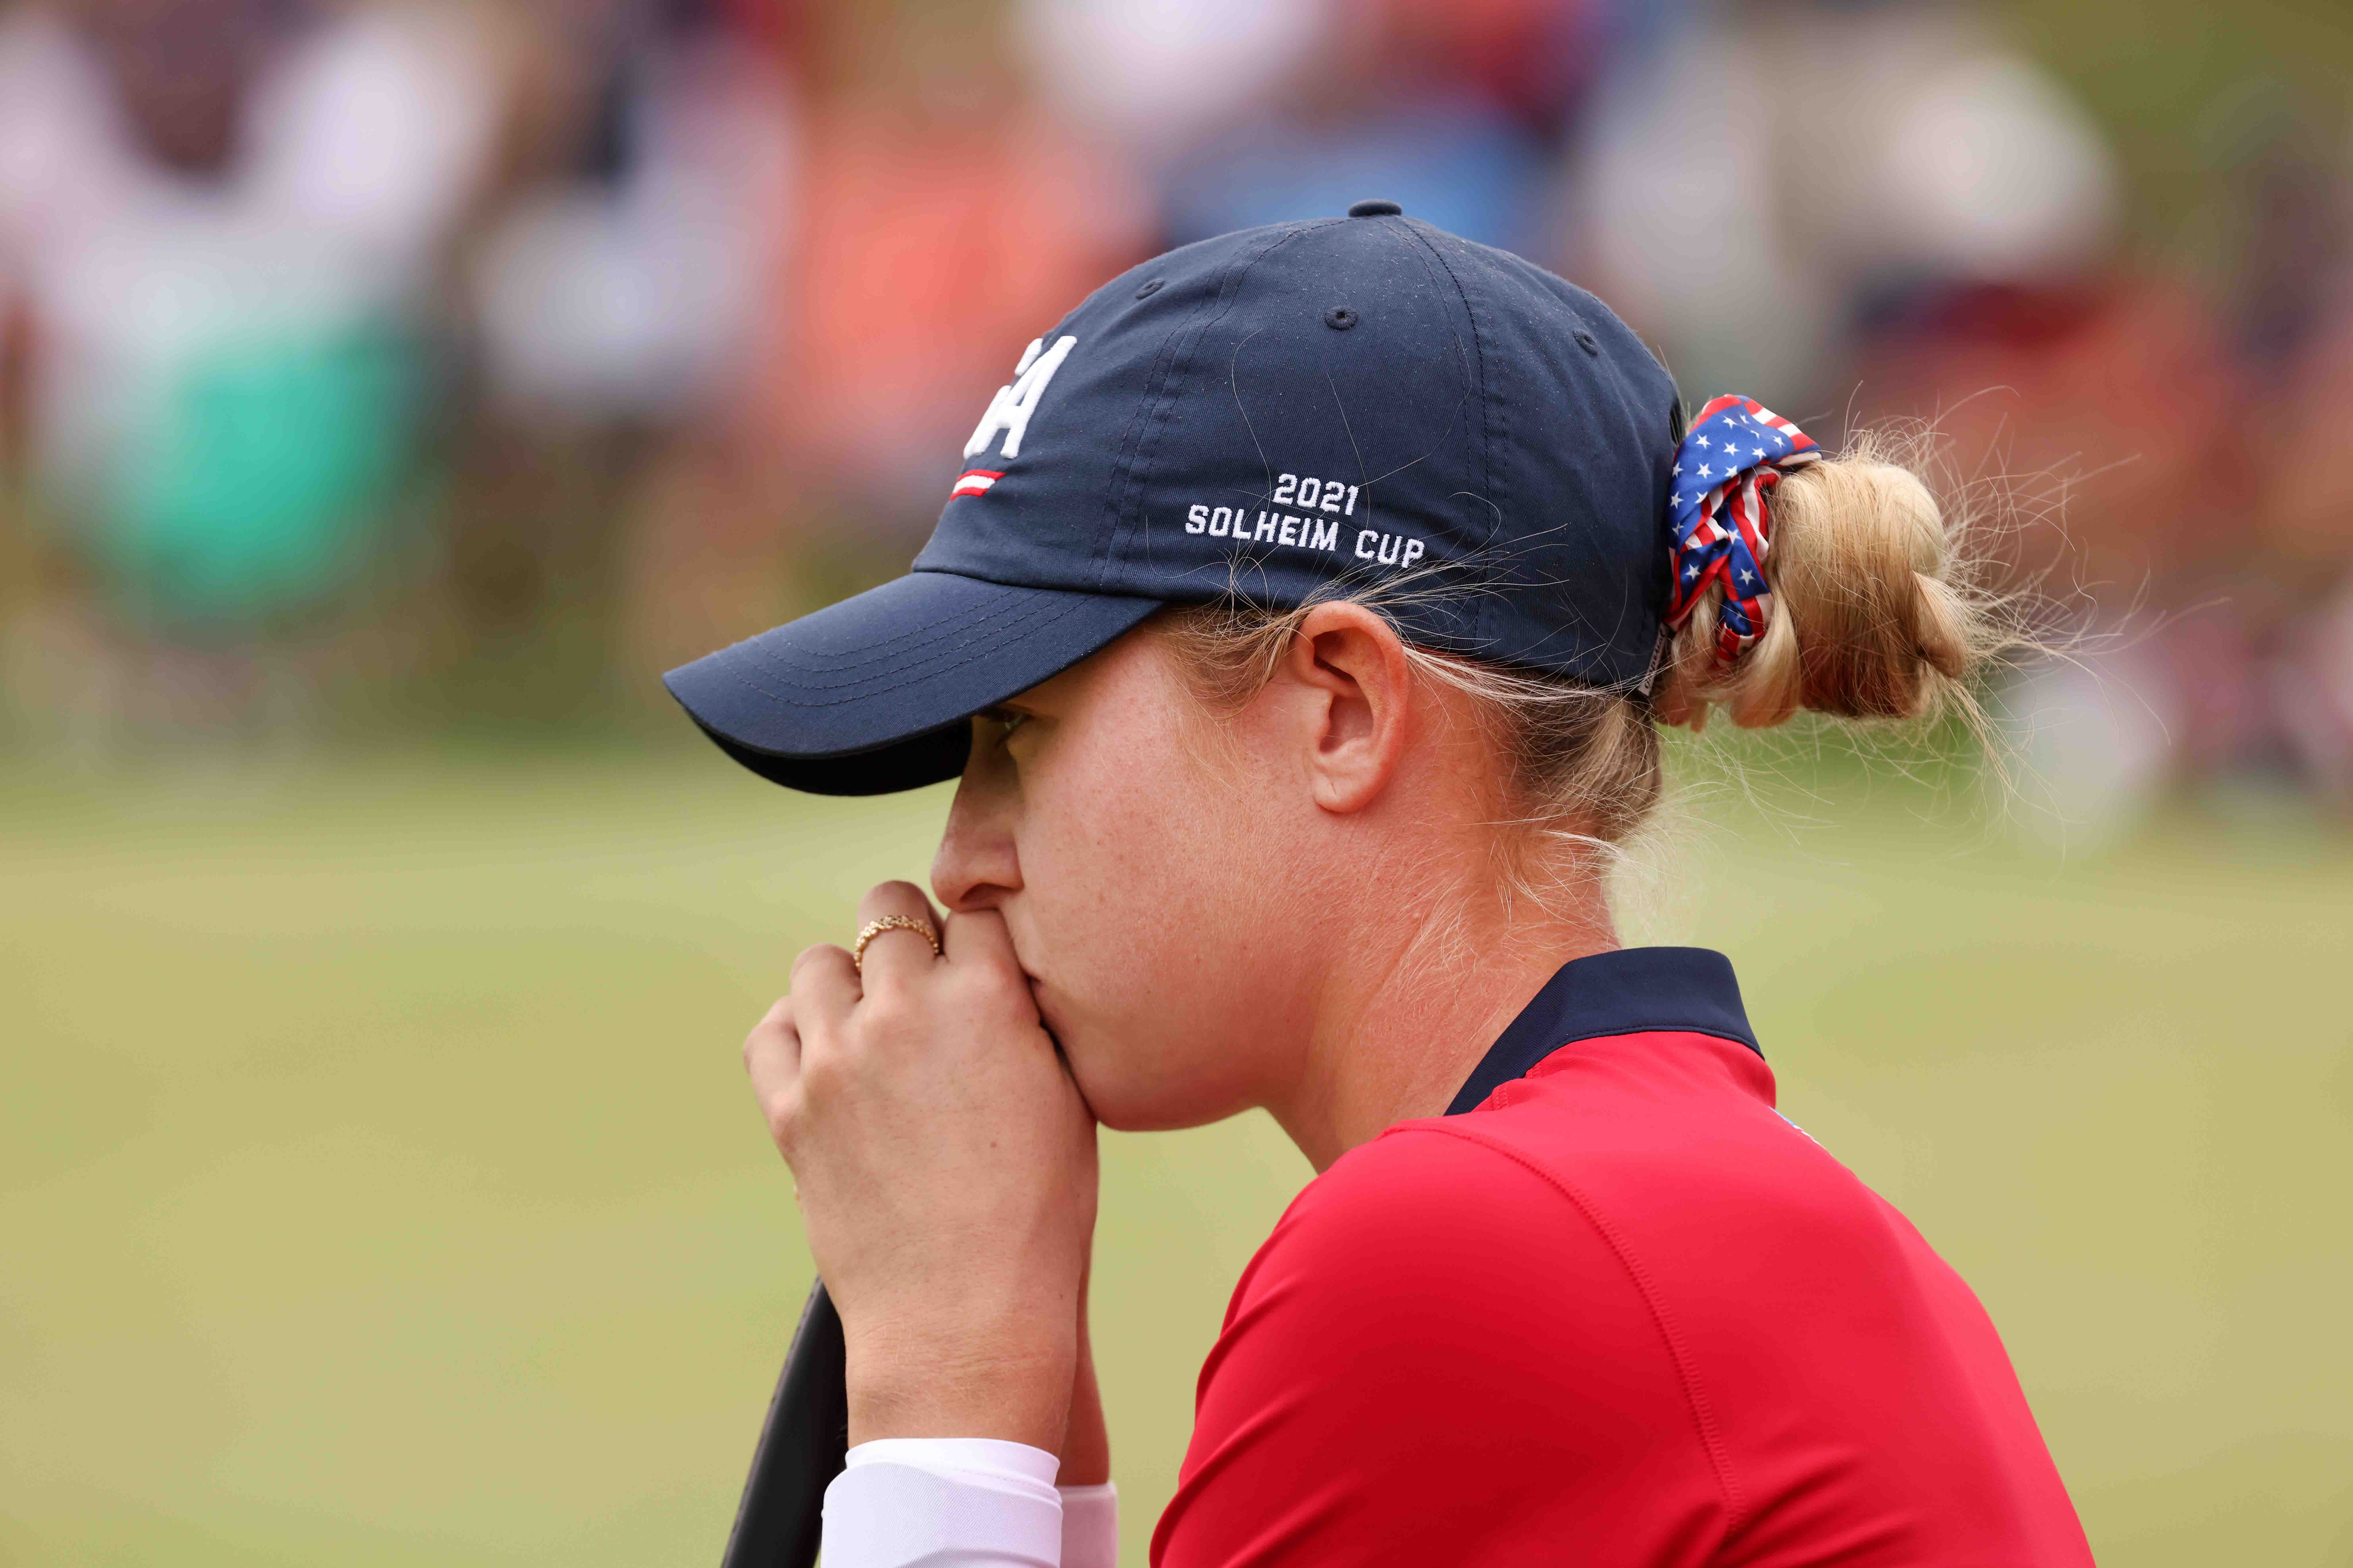 solheim cup rules row